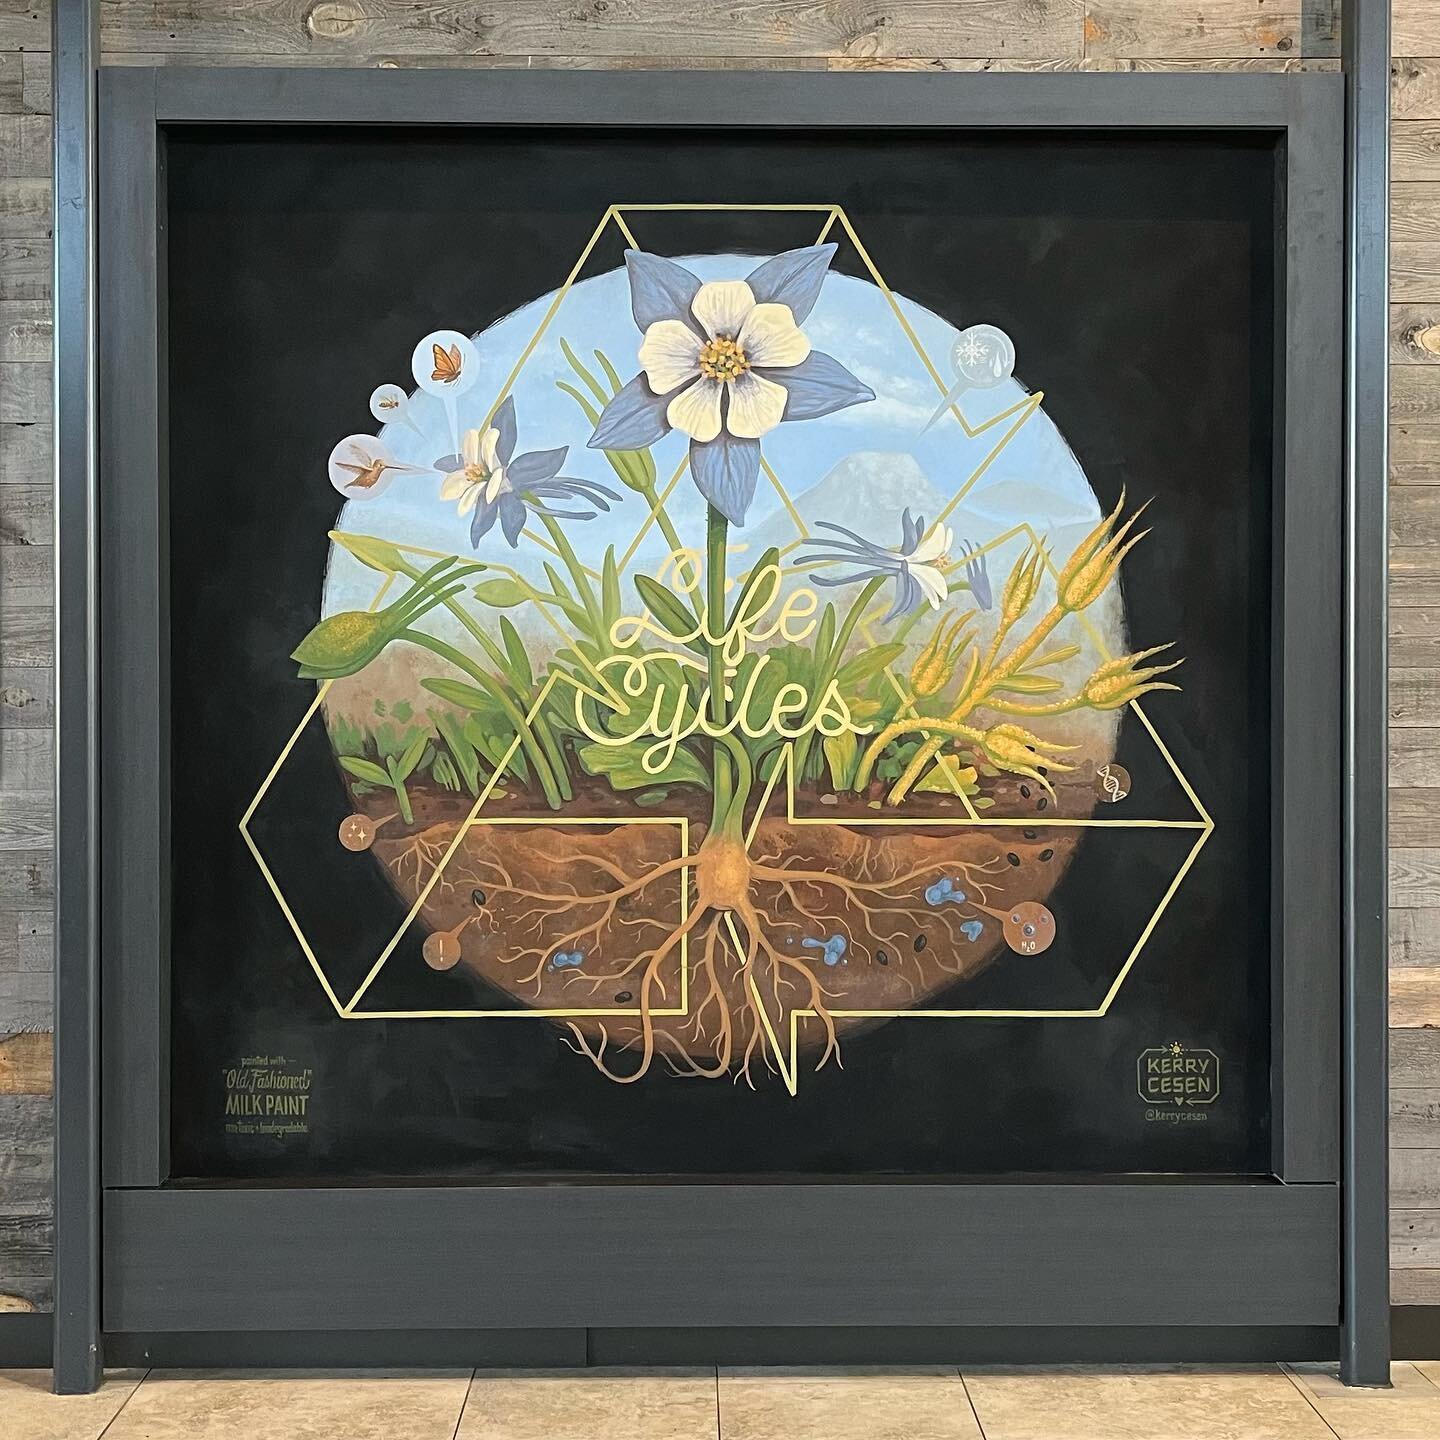 Recently finished this interior botanical mural for @denverpremoutlets in Thornton, Colorado. 

This mural features Colorado&rsquo;s state flower, the Blue Columbine. The design shows the various stages of the plant&rsquo;s life cycle, while several 